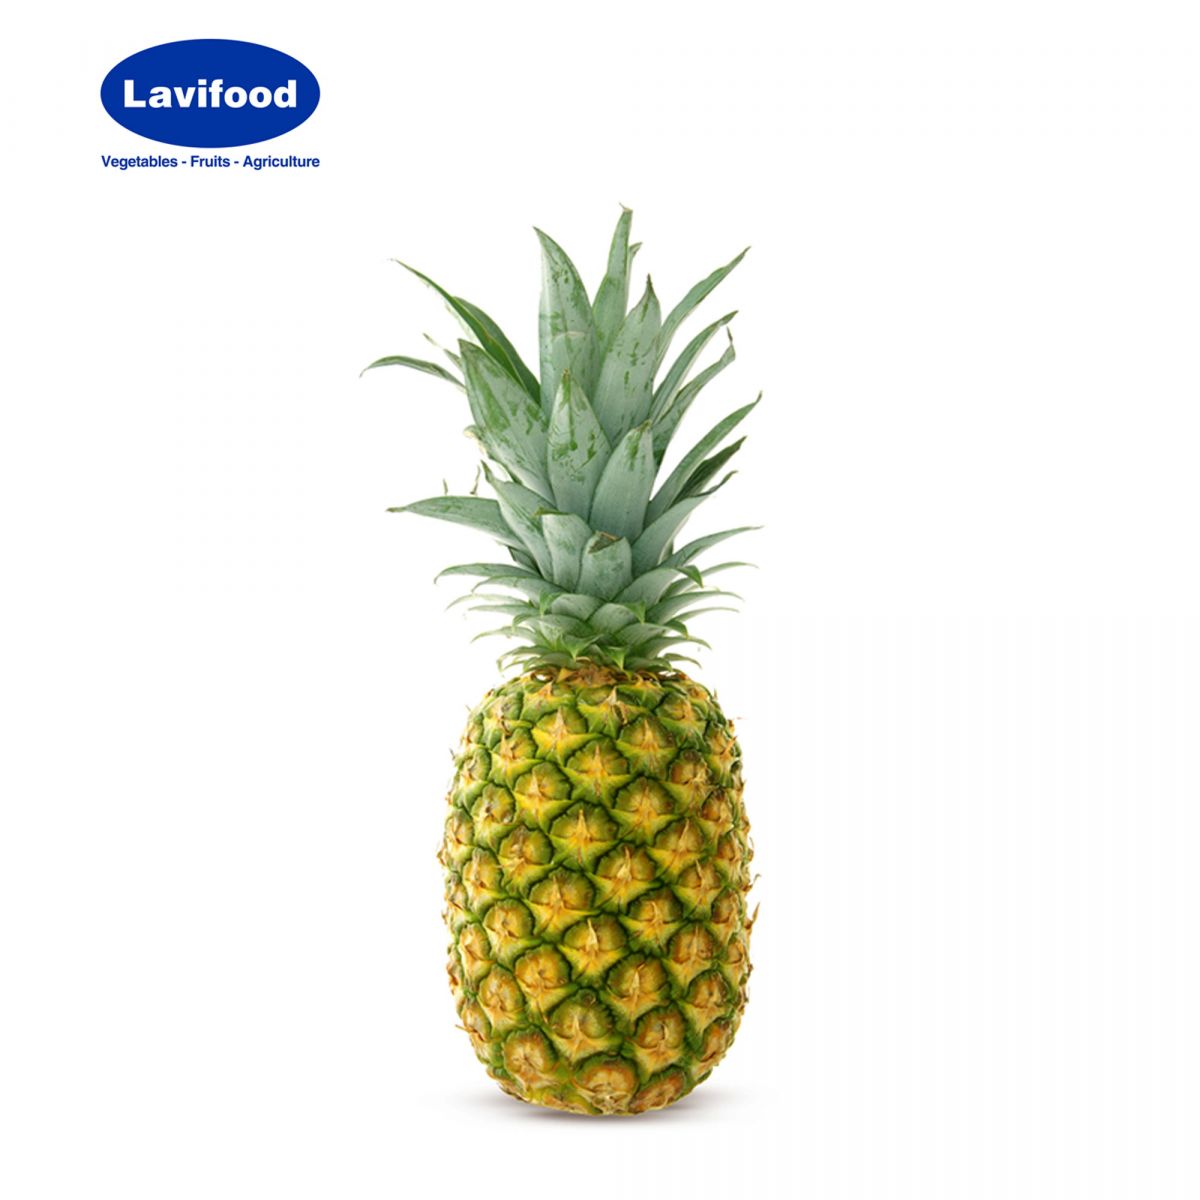 http://lavifood.com/en/products/fresh-fruits/pineapple-1